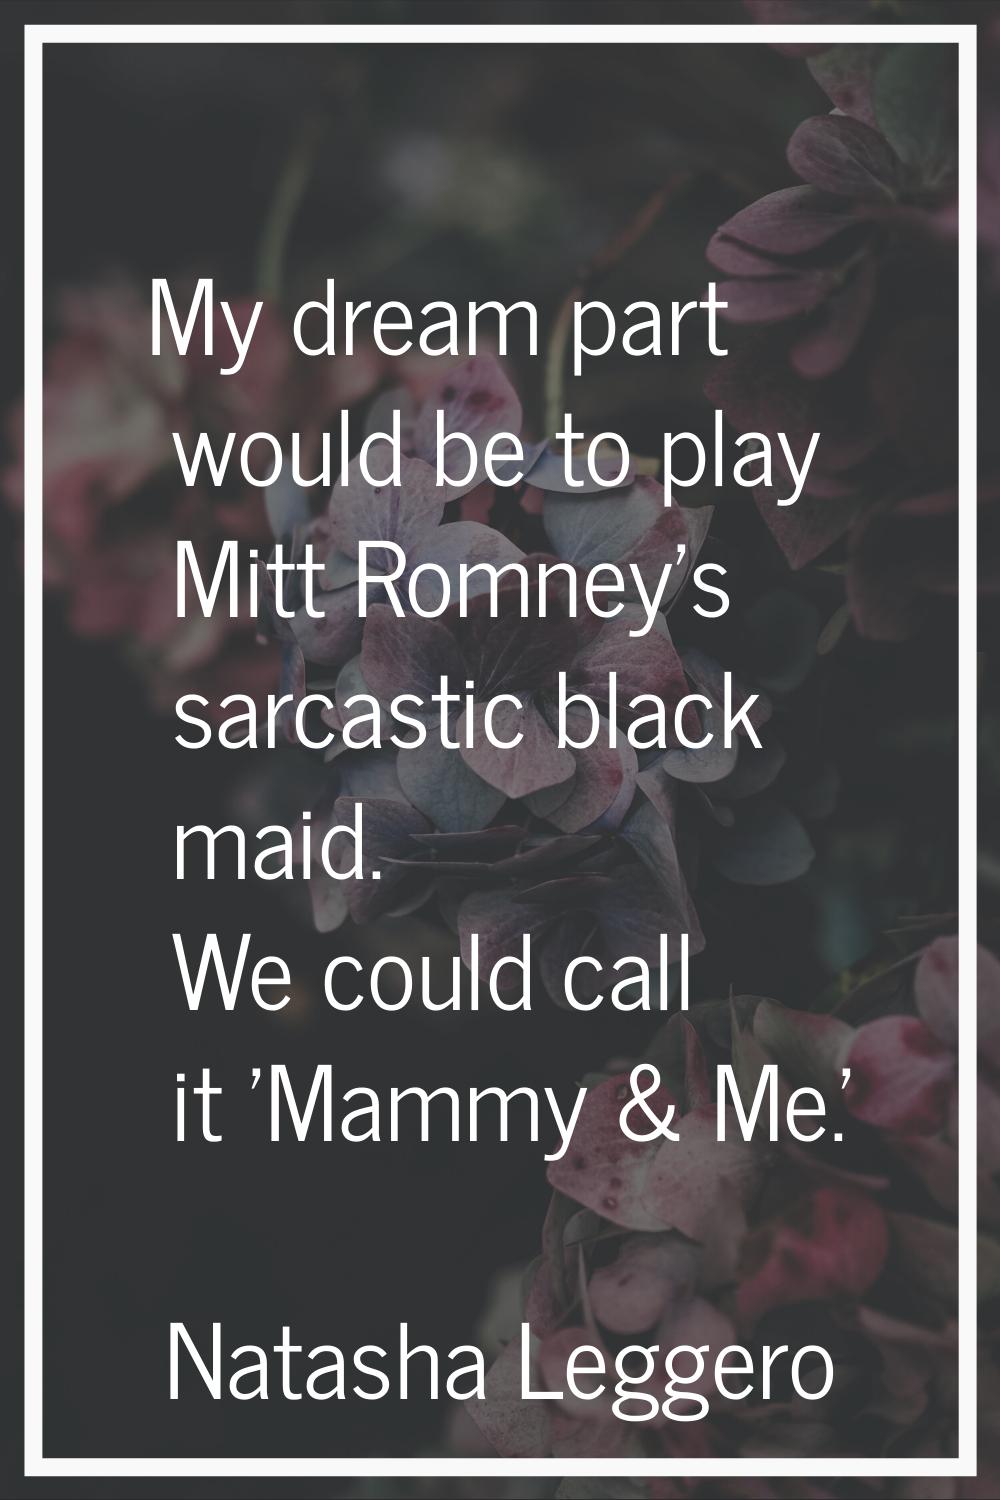 My dream part would be to play Mitt Romney's sarcastic black maid. We could call it 'Mammy & Me.'